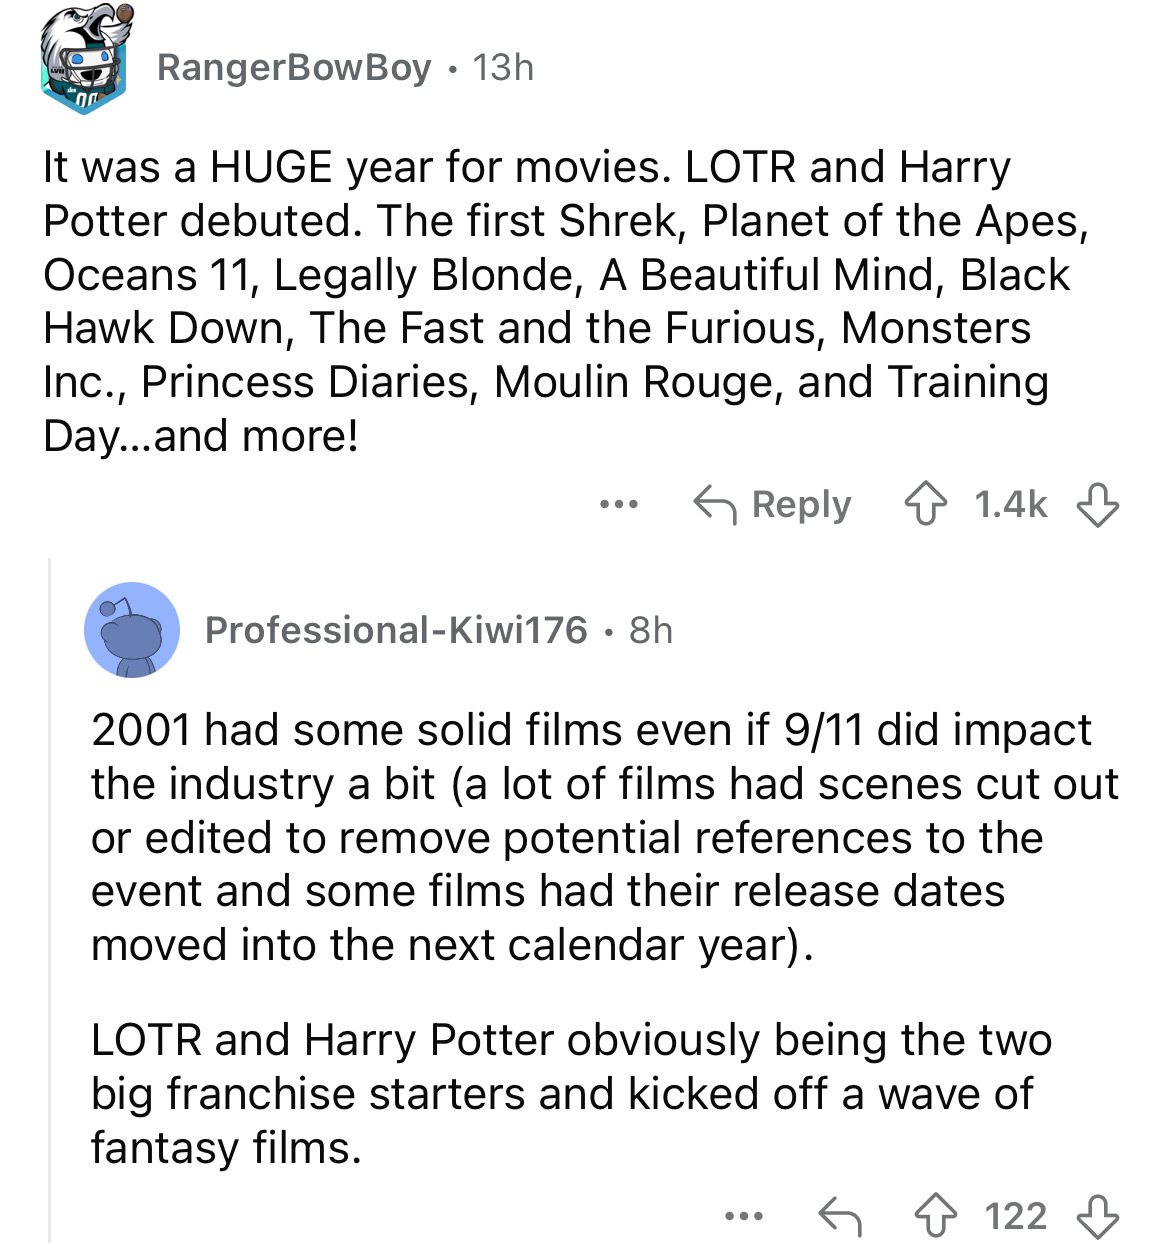 screenshot - RangerBowBoy 13h It was a Huge year for movies. Lotr and Harry Potter debuted. The first Shrek, Planet of the Apes, Oceans 11, Legally Blonde, A Beautiful Mind, Black Hawk Down, The Fast and the Furious, Monsters Inc., Princess Diaries, Mouli